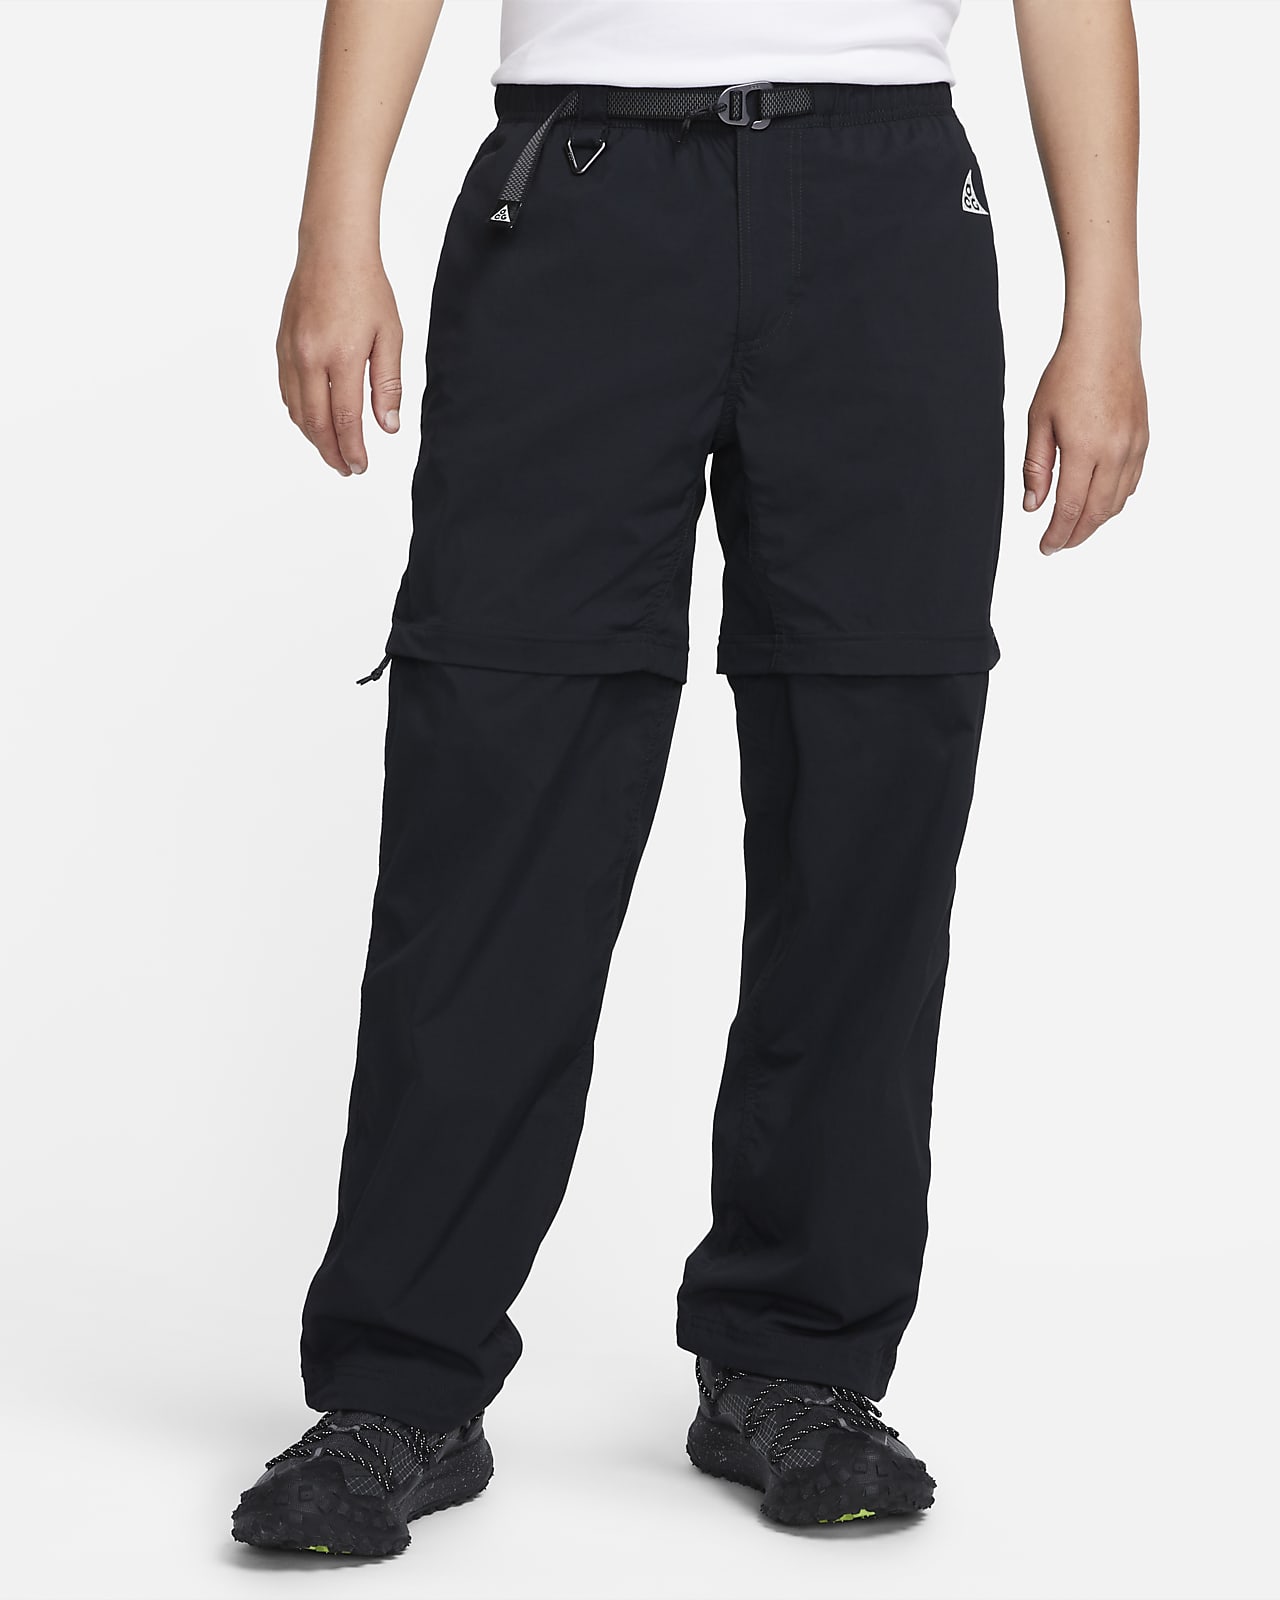 Moncler Grenoble Zip Off Cargo Pants Military Green at CareOfCarl.com